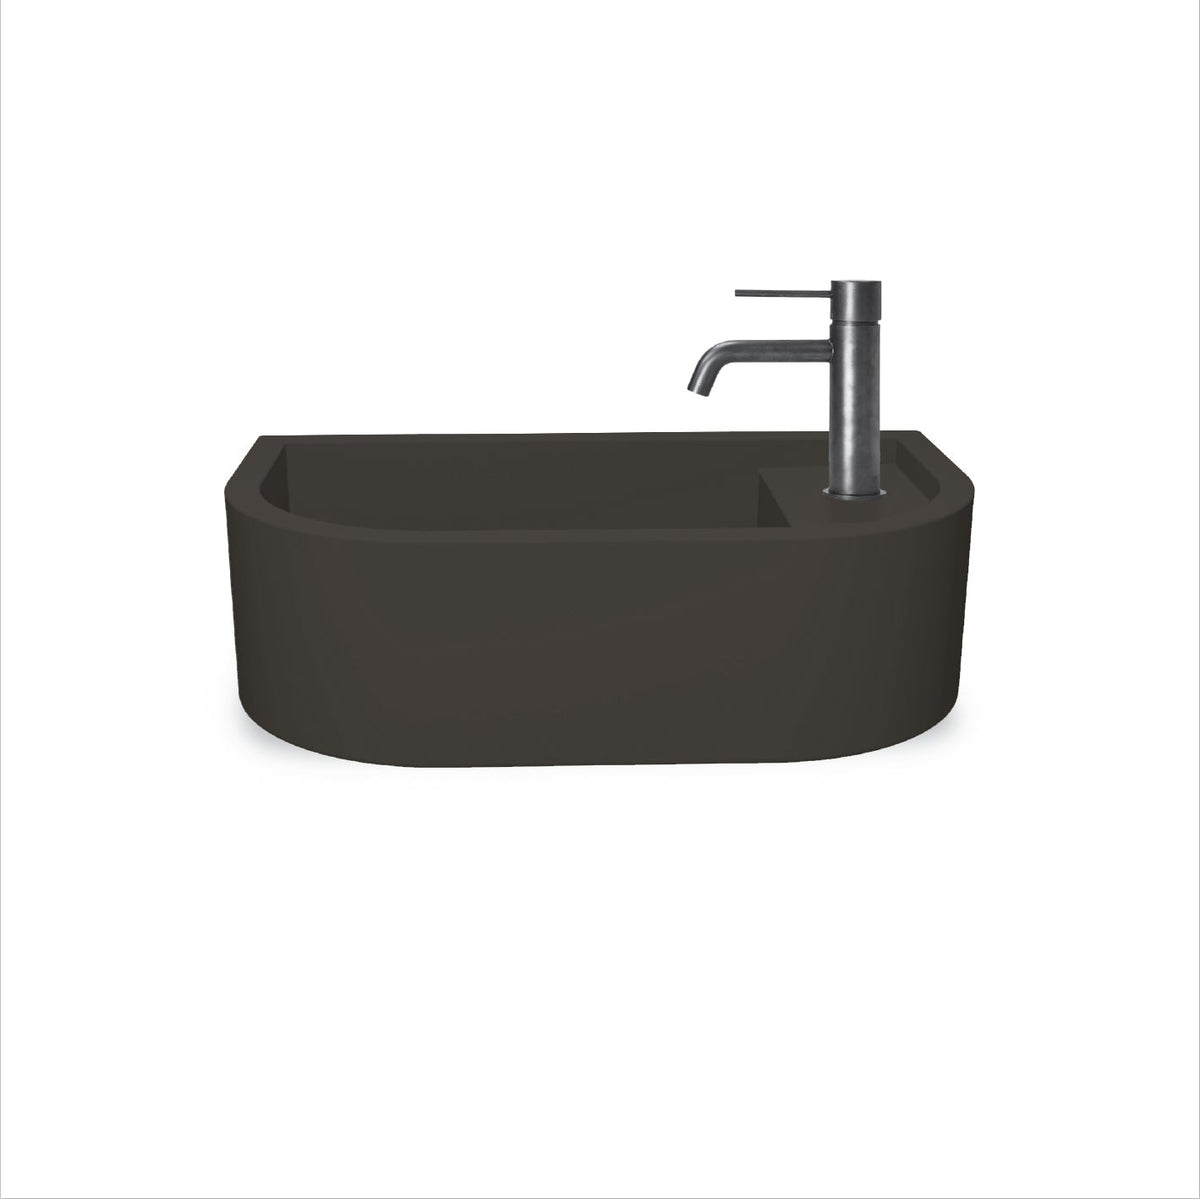 Loop 01 Basin - Overflow - Wall Hung (Charcoal,Tap Hole,Chrome)